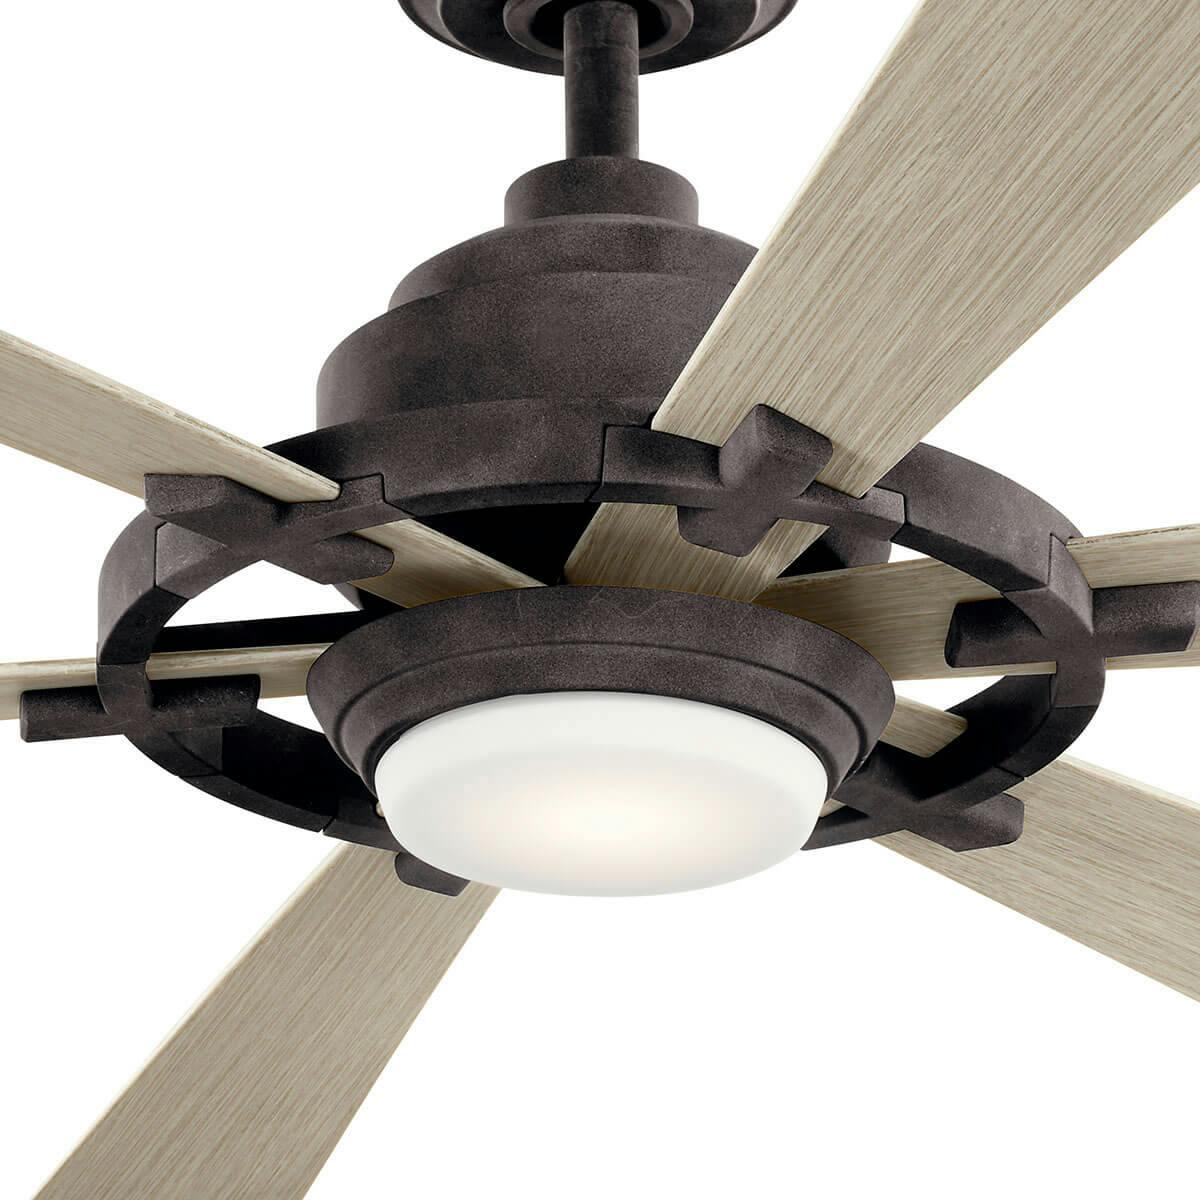 Close up view of the Gentry Lite 52" Ceiling Fan Weathered Zinc on a white background